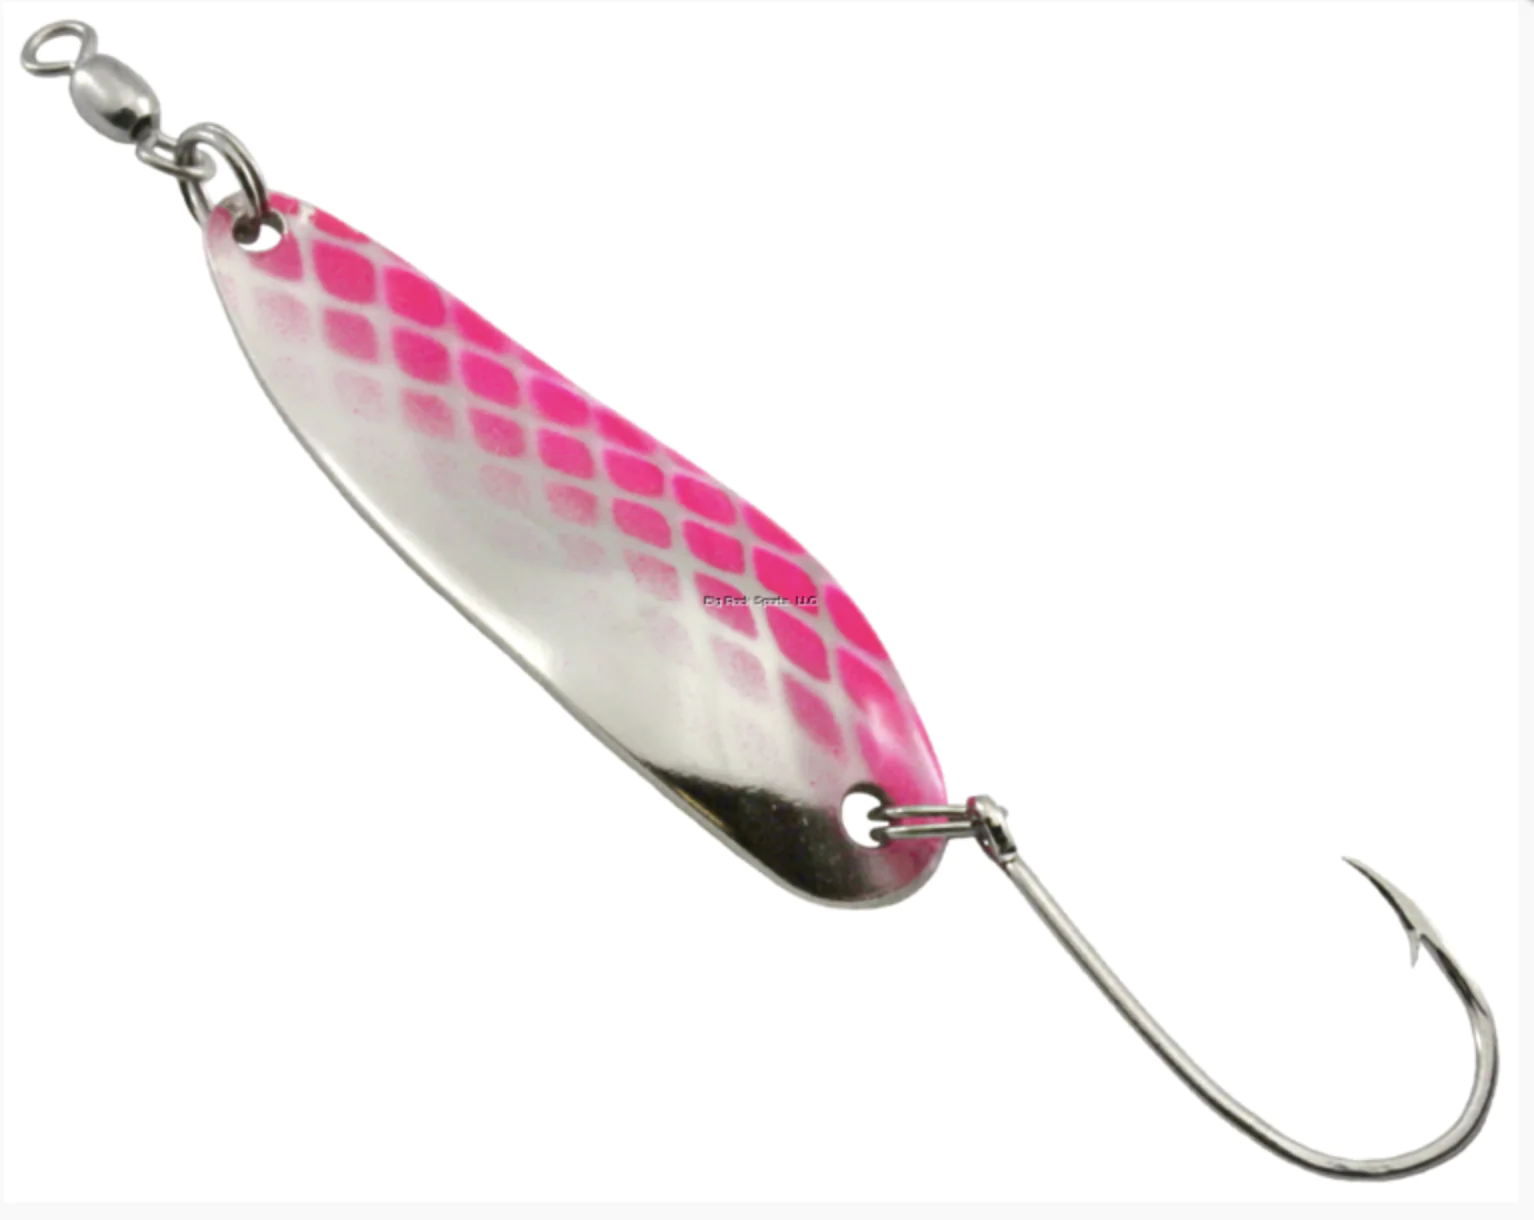 Gibbs Croc Spoons  Hatch Match'r Fly & Tackle